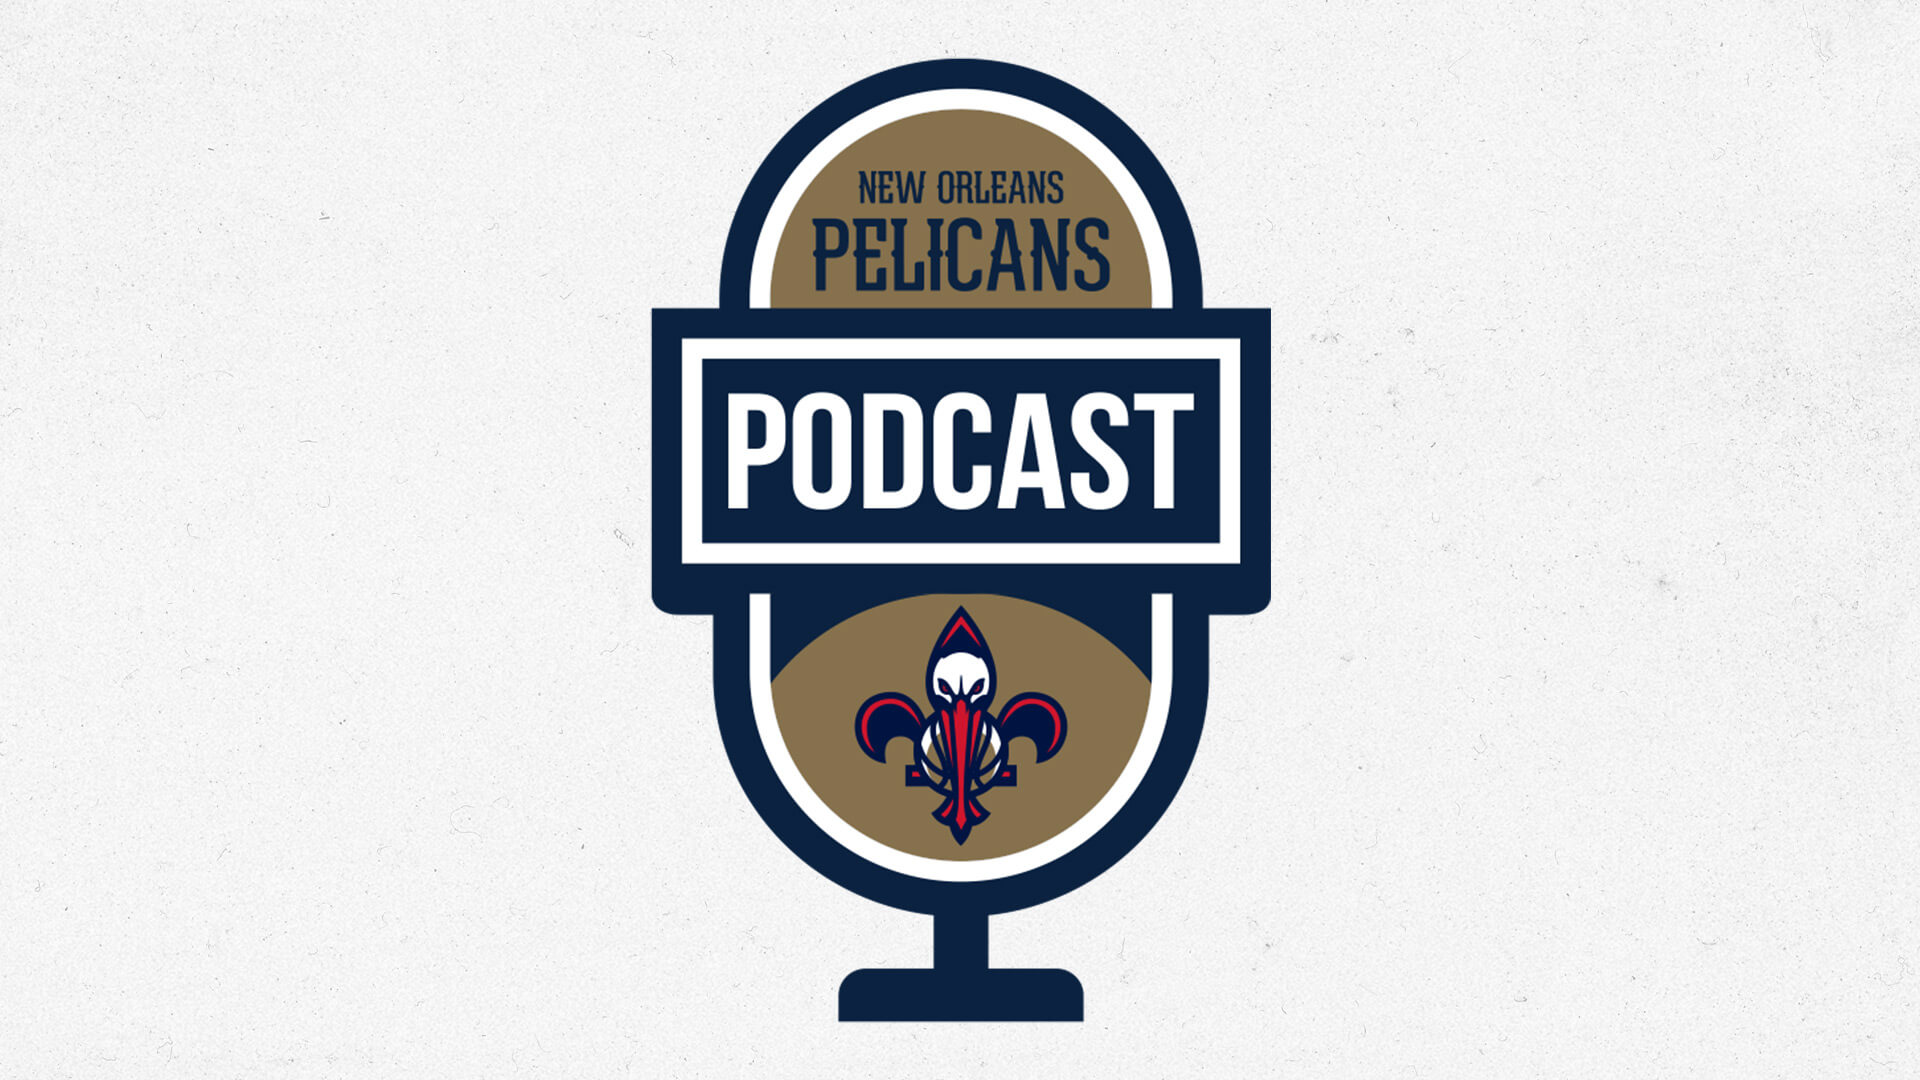 Who steps up for the shorthanded Pelicans, state of the NBA Western Conference | Pelicans Podcast